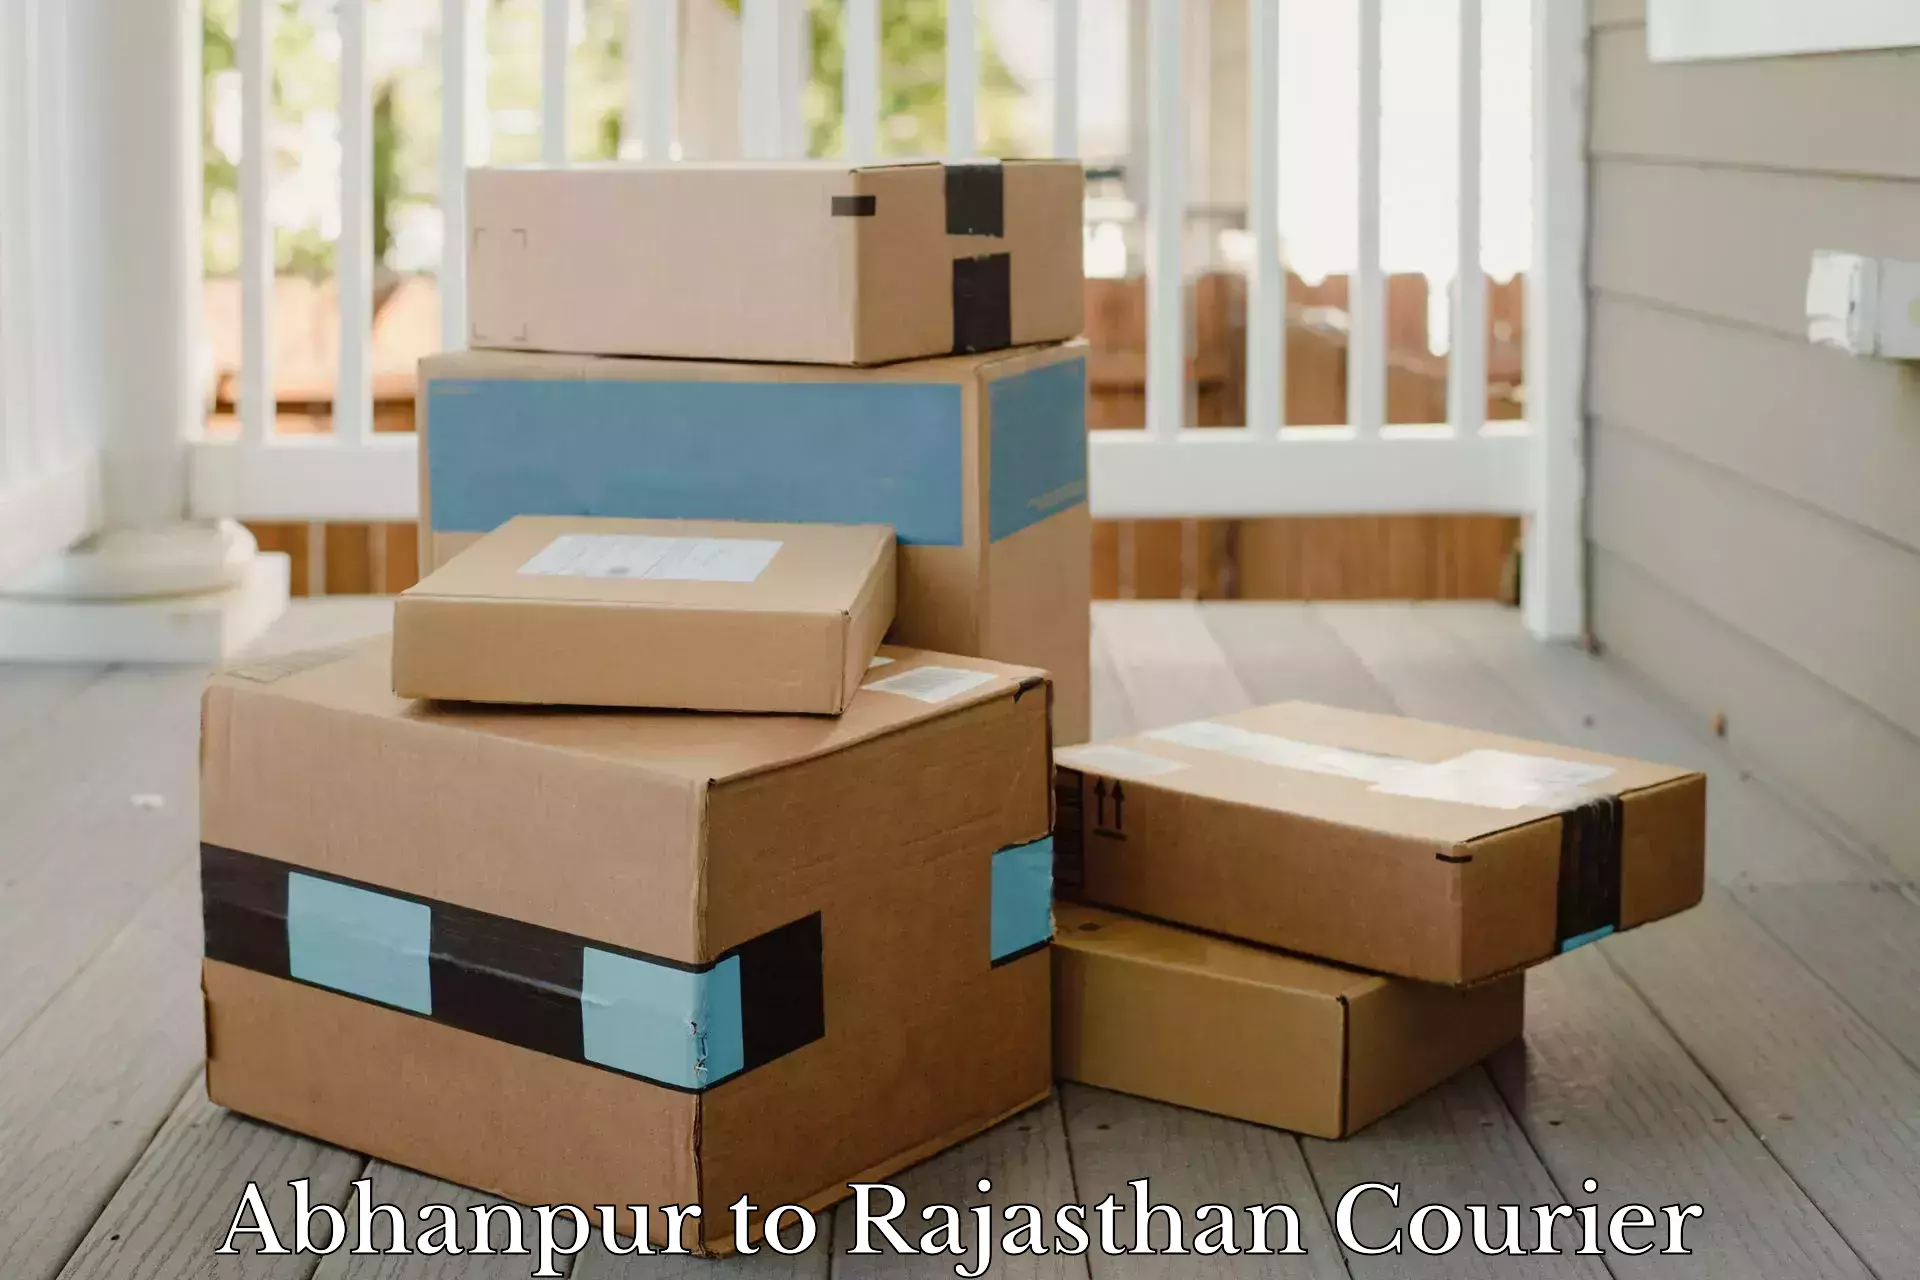 Weekend courier service in Abhanpur to Neemrana